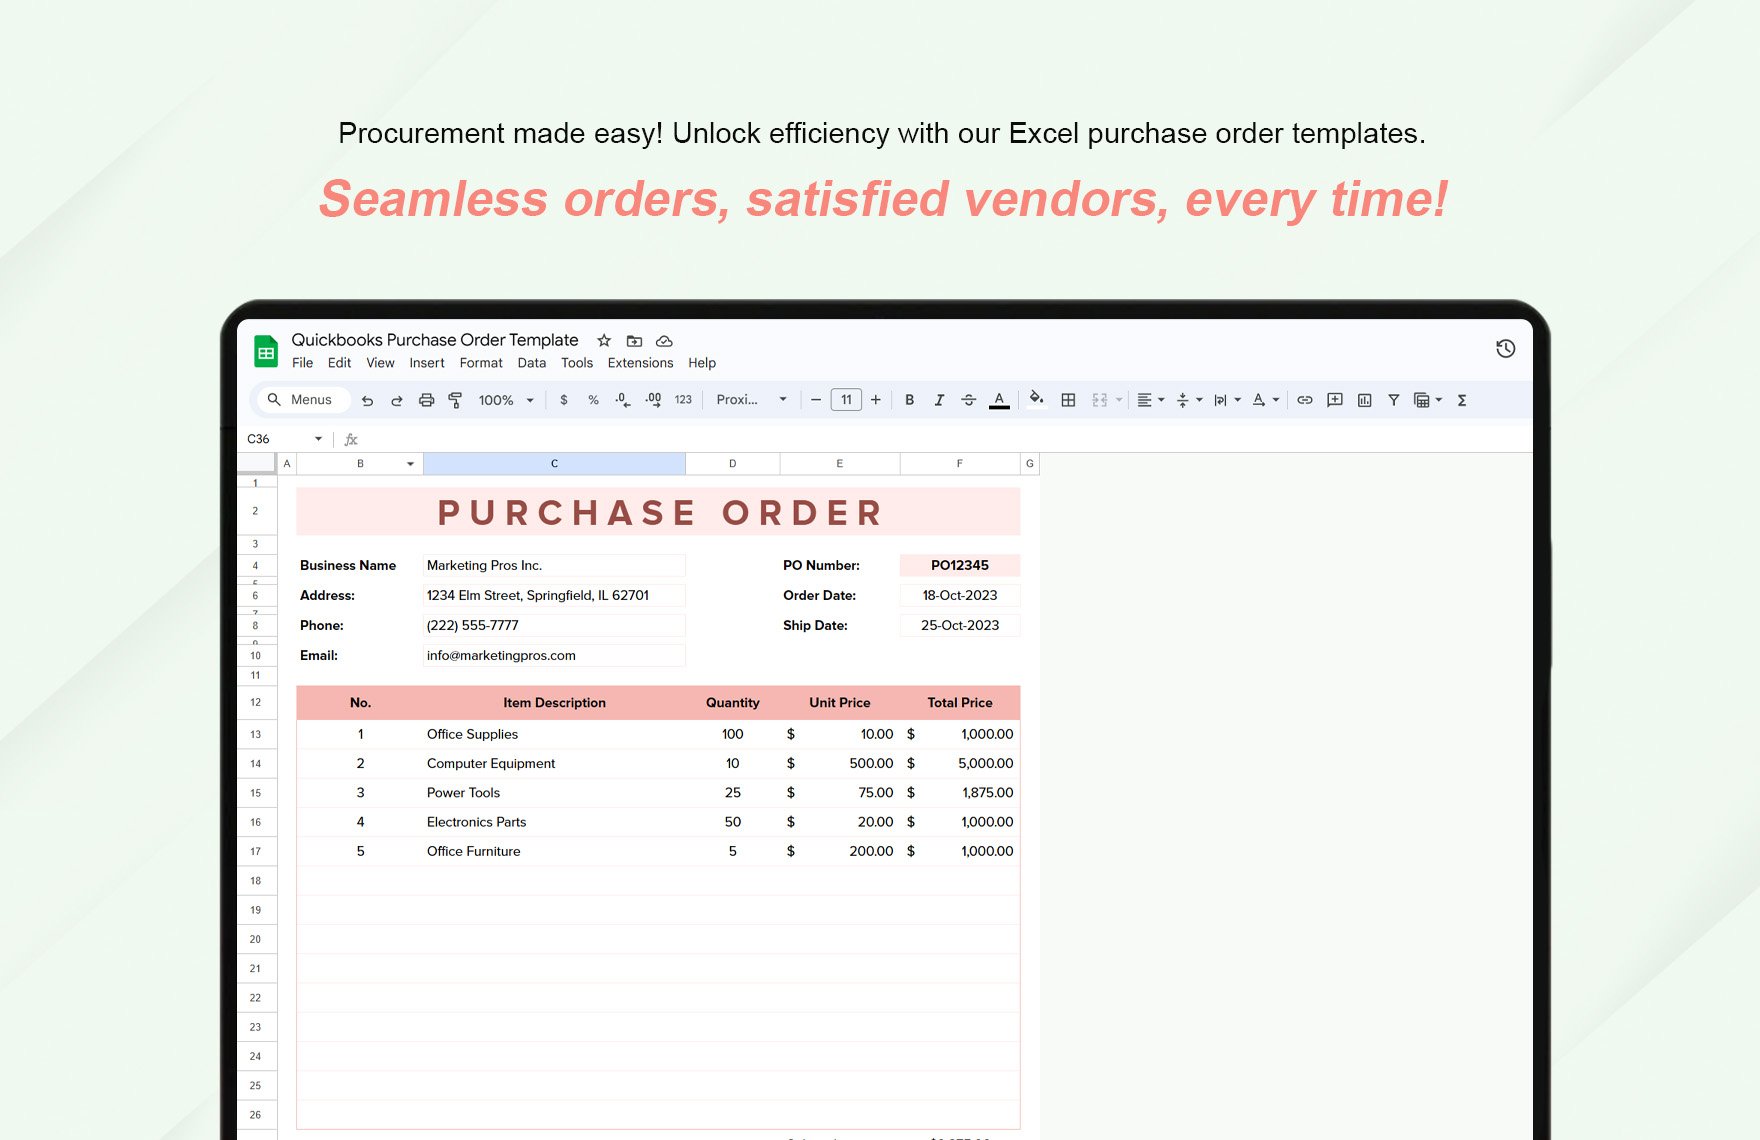 Quickbooks Purchase Order Template